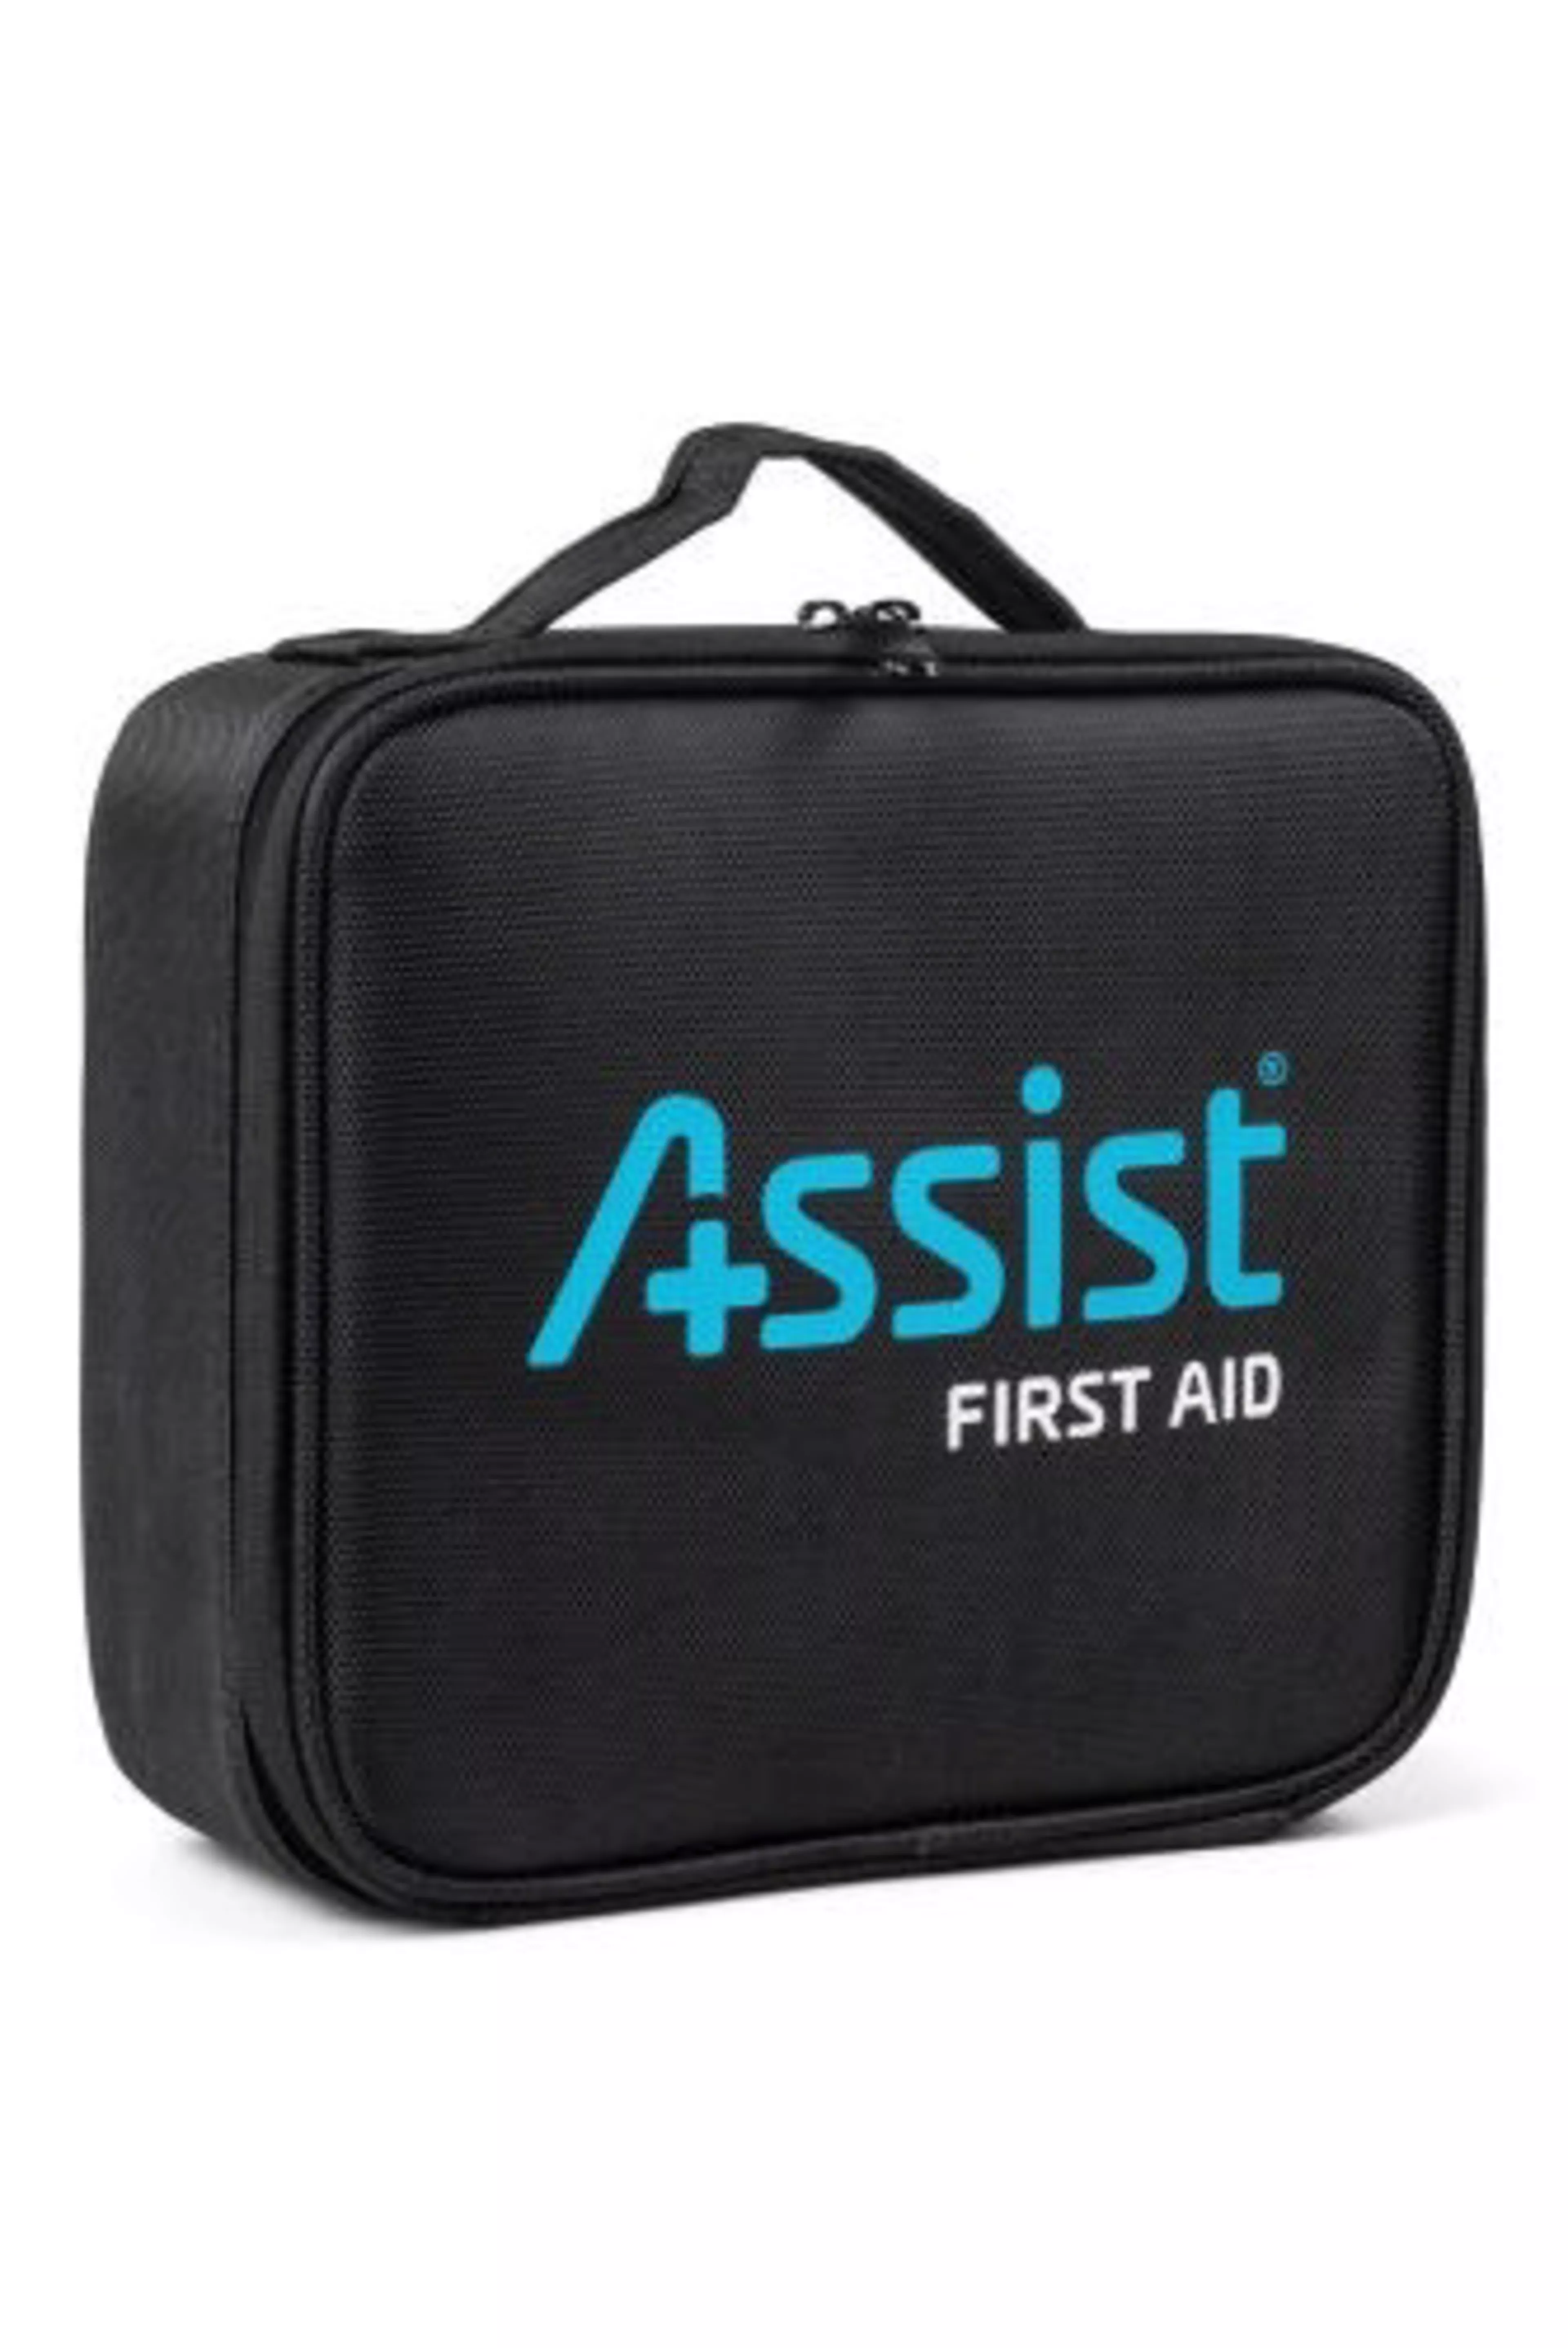 ASSIST MEDICAL CASE SMALL